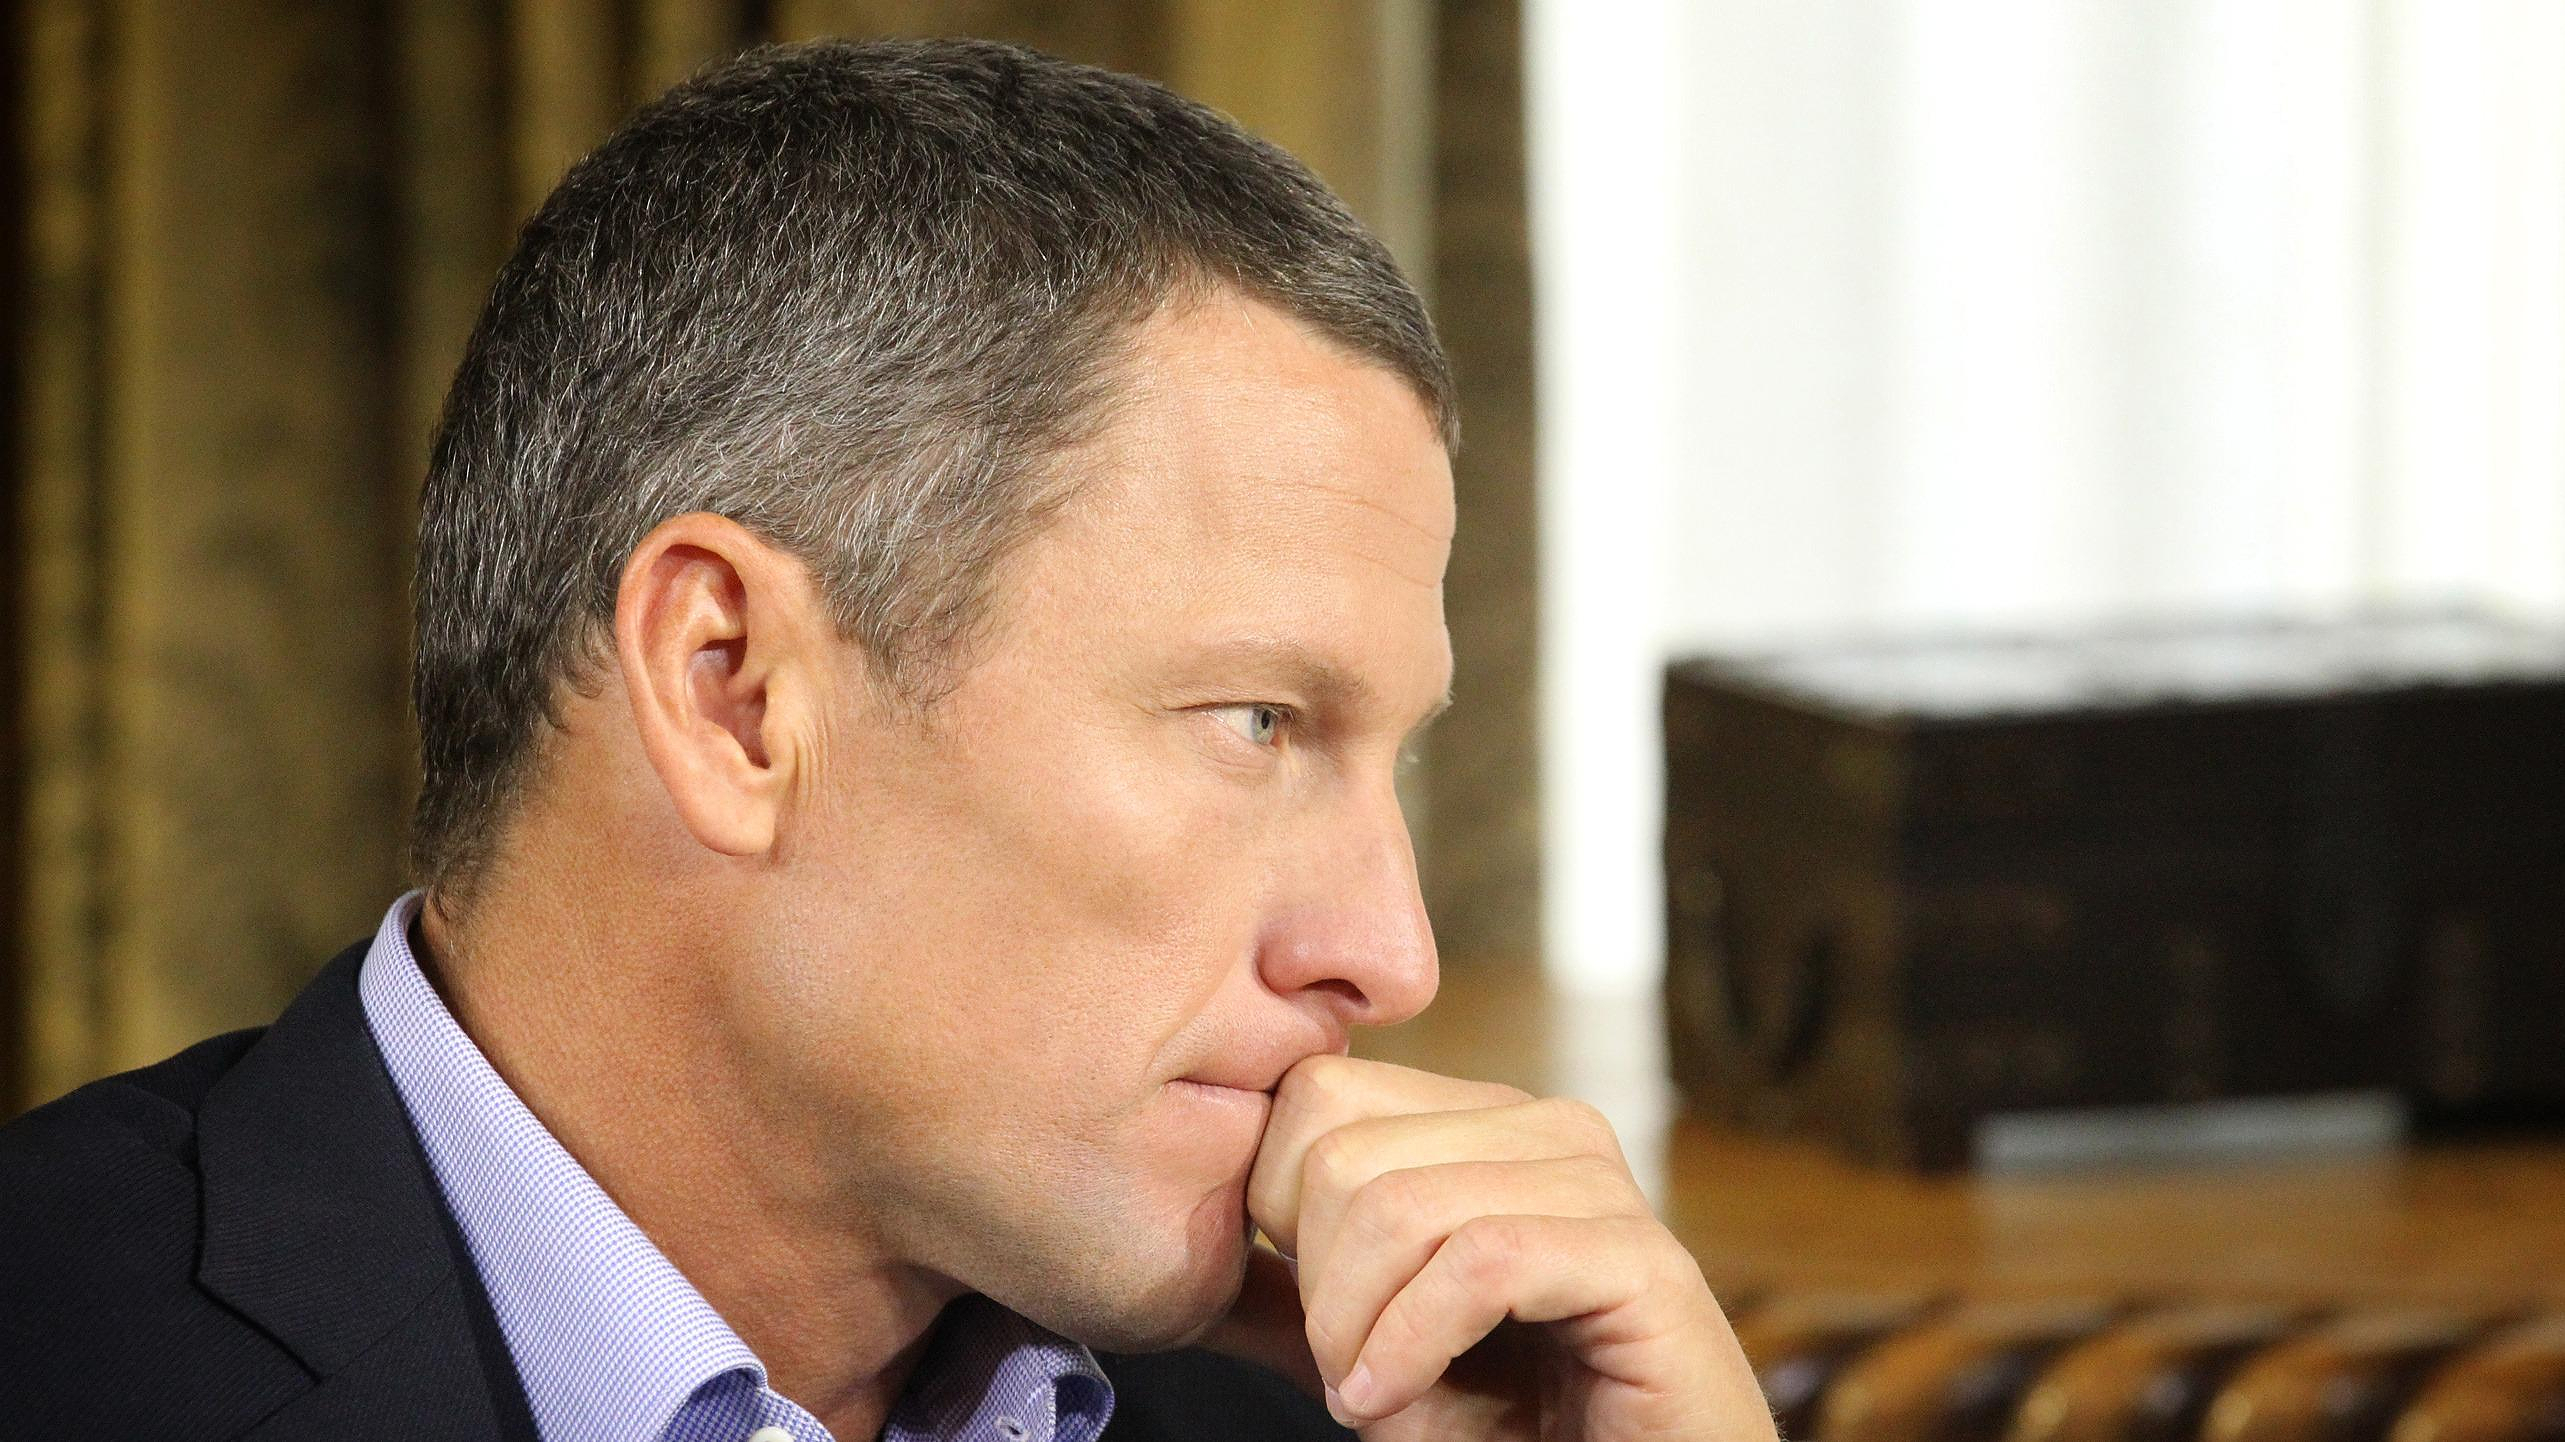 Cycling: Lance Armstrong underwent intense “10 hours a day” therapy after his doping confession